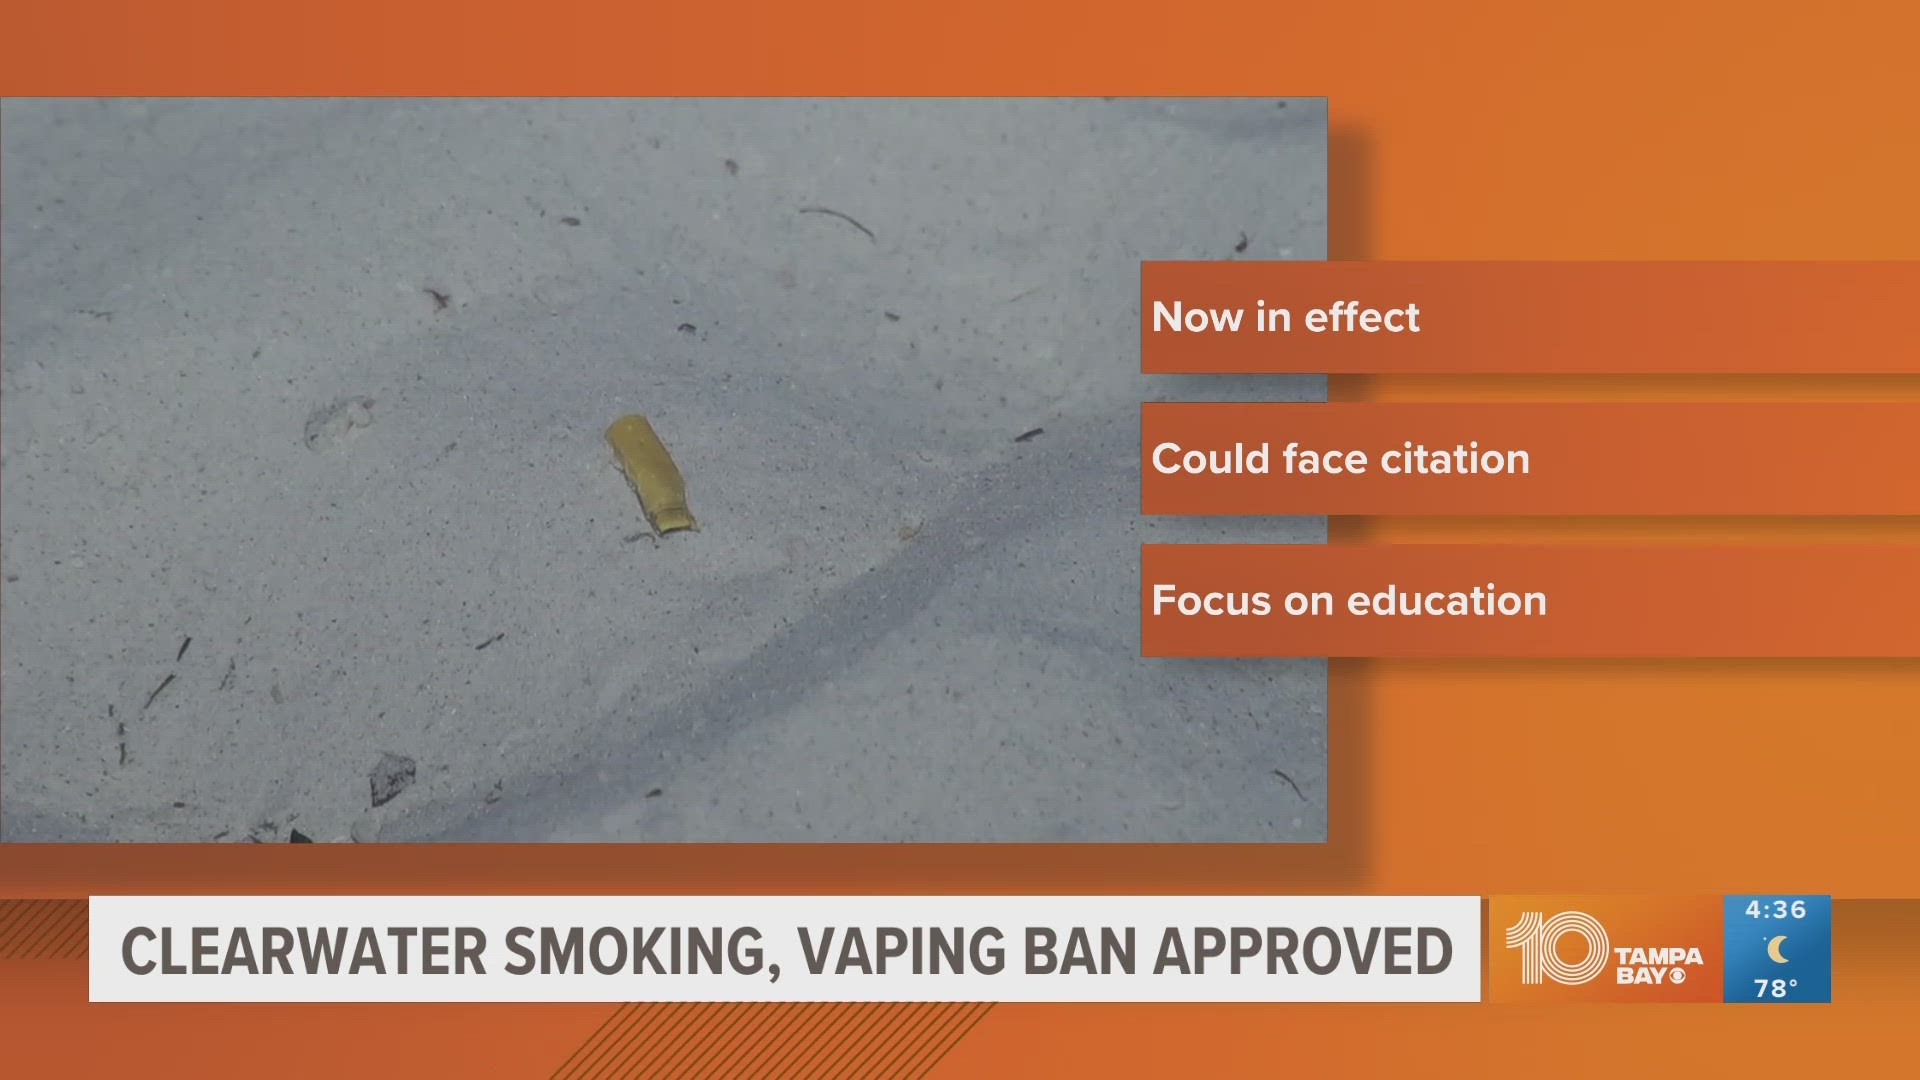 The smoking and vaping ban went into effect immediately.